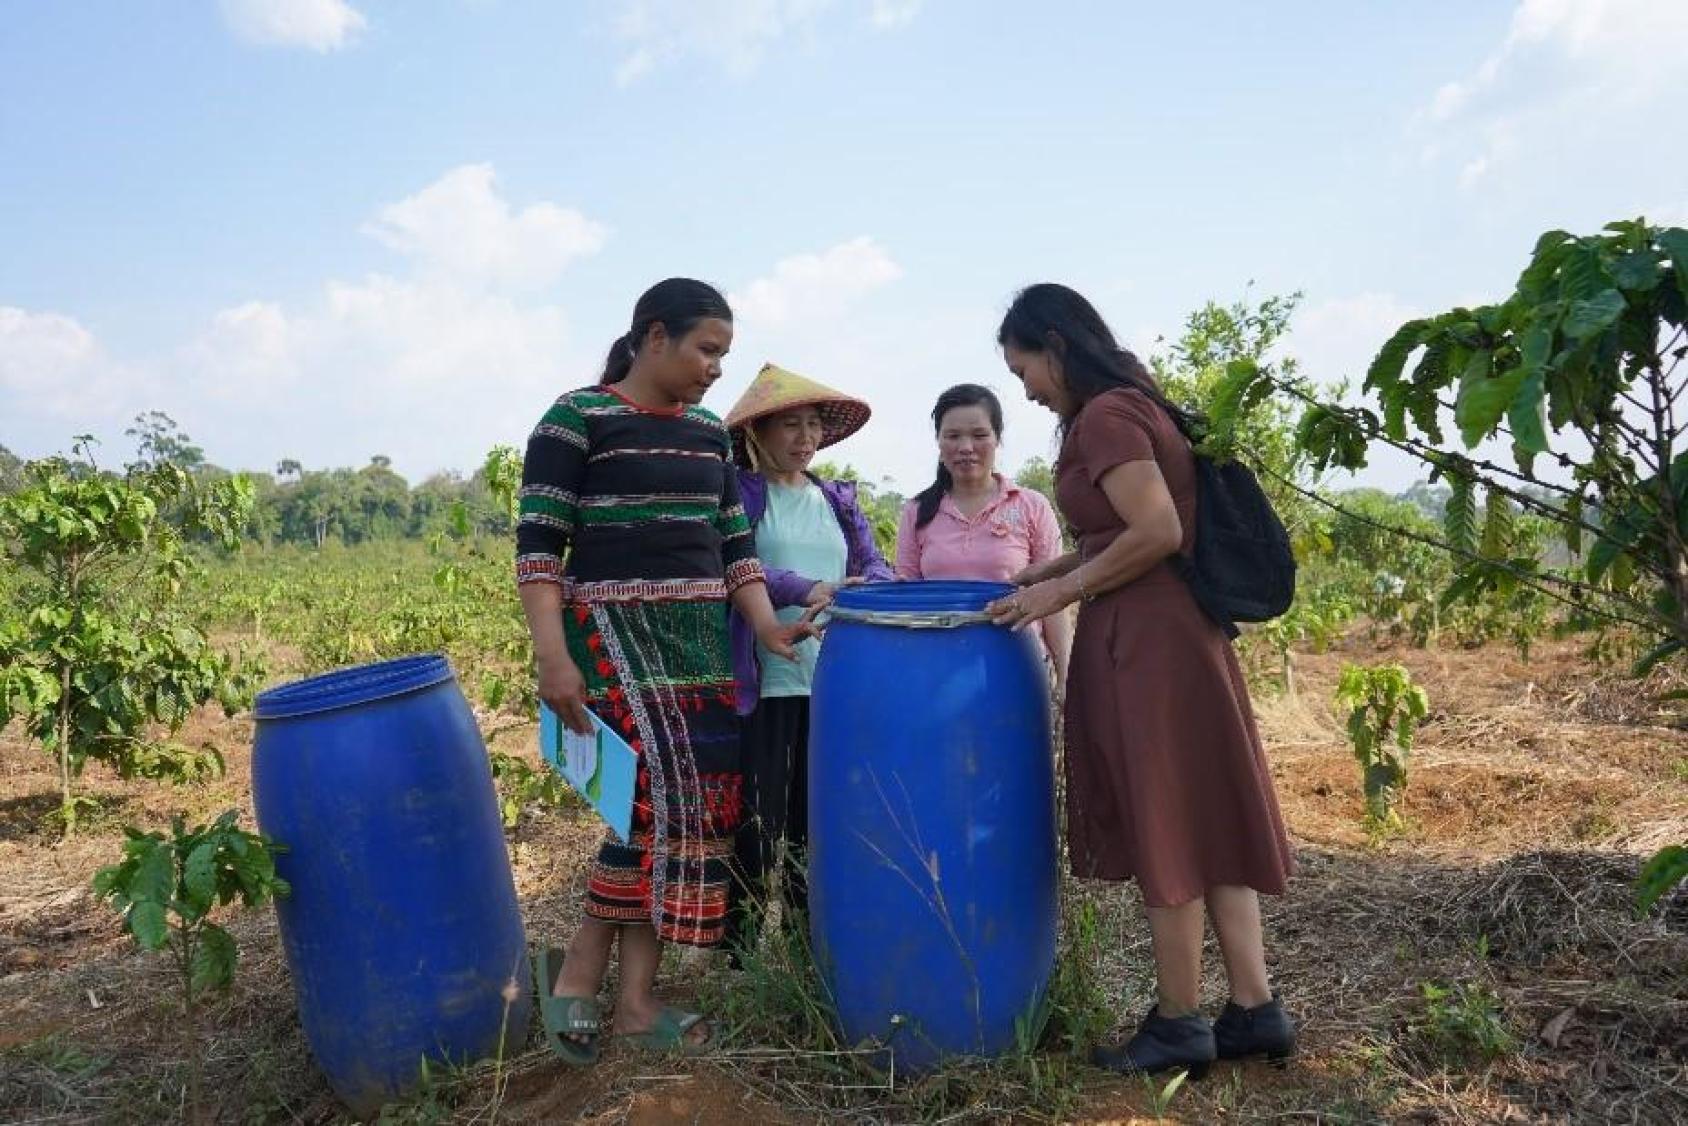 Four women in skirts and straw hats standing over two big blue vats against a background of trees and soil